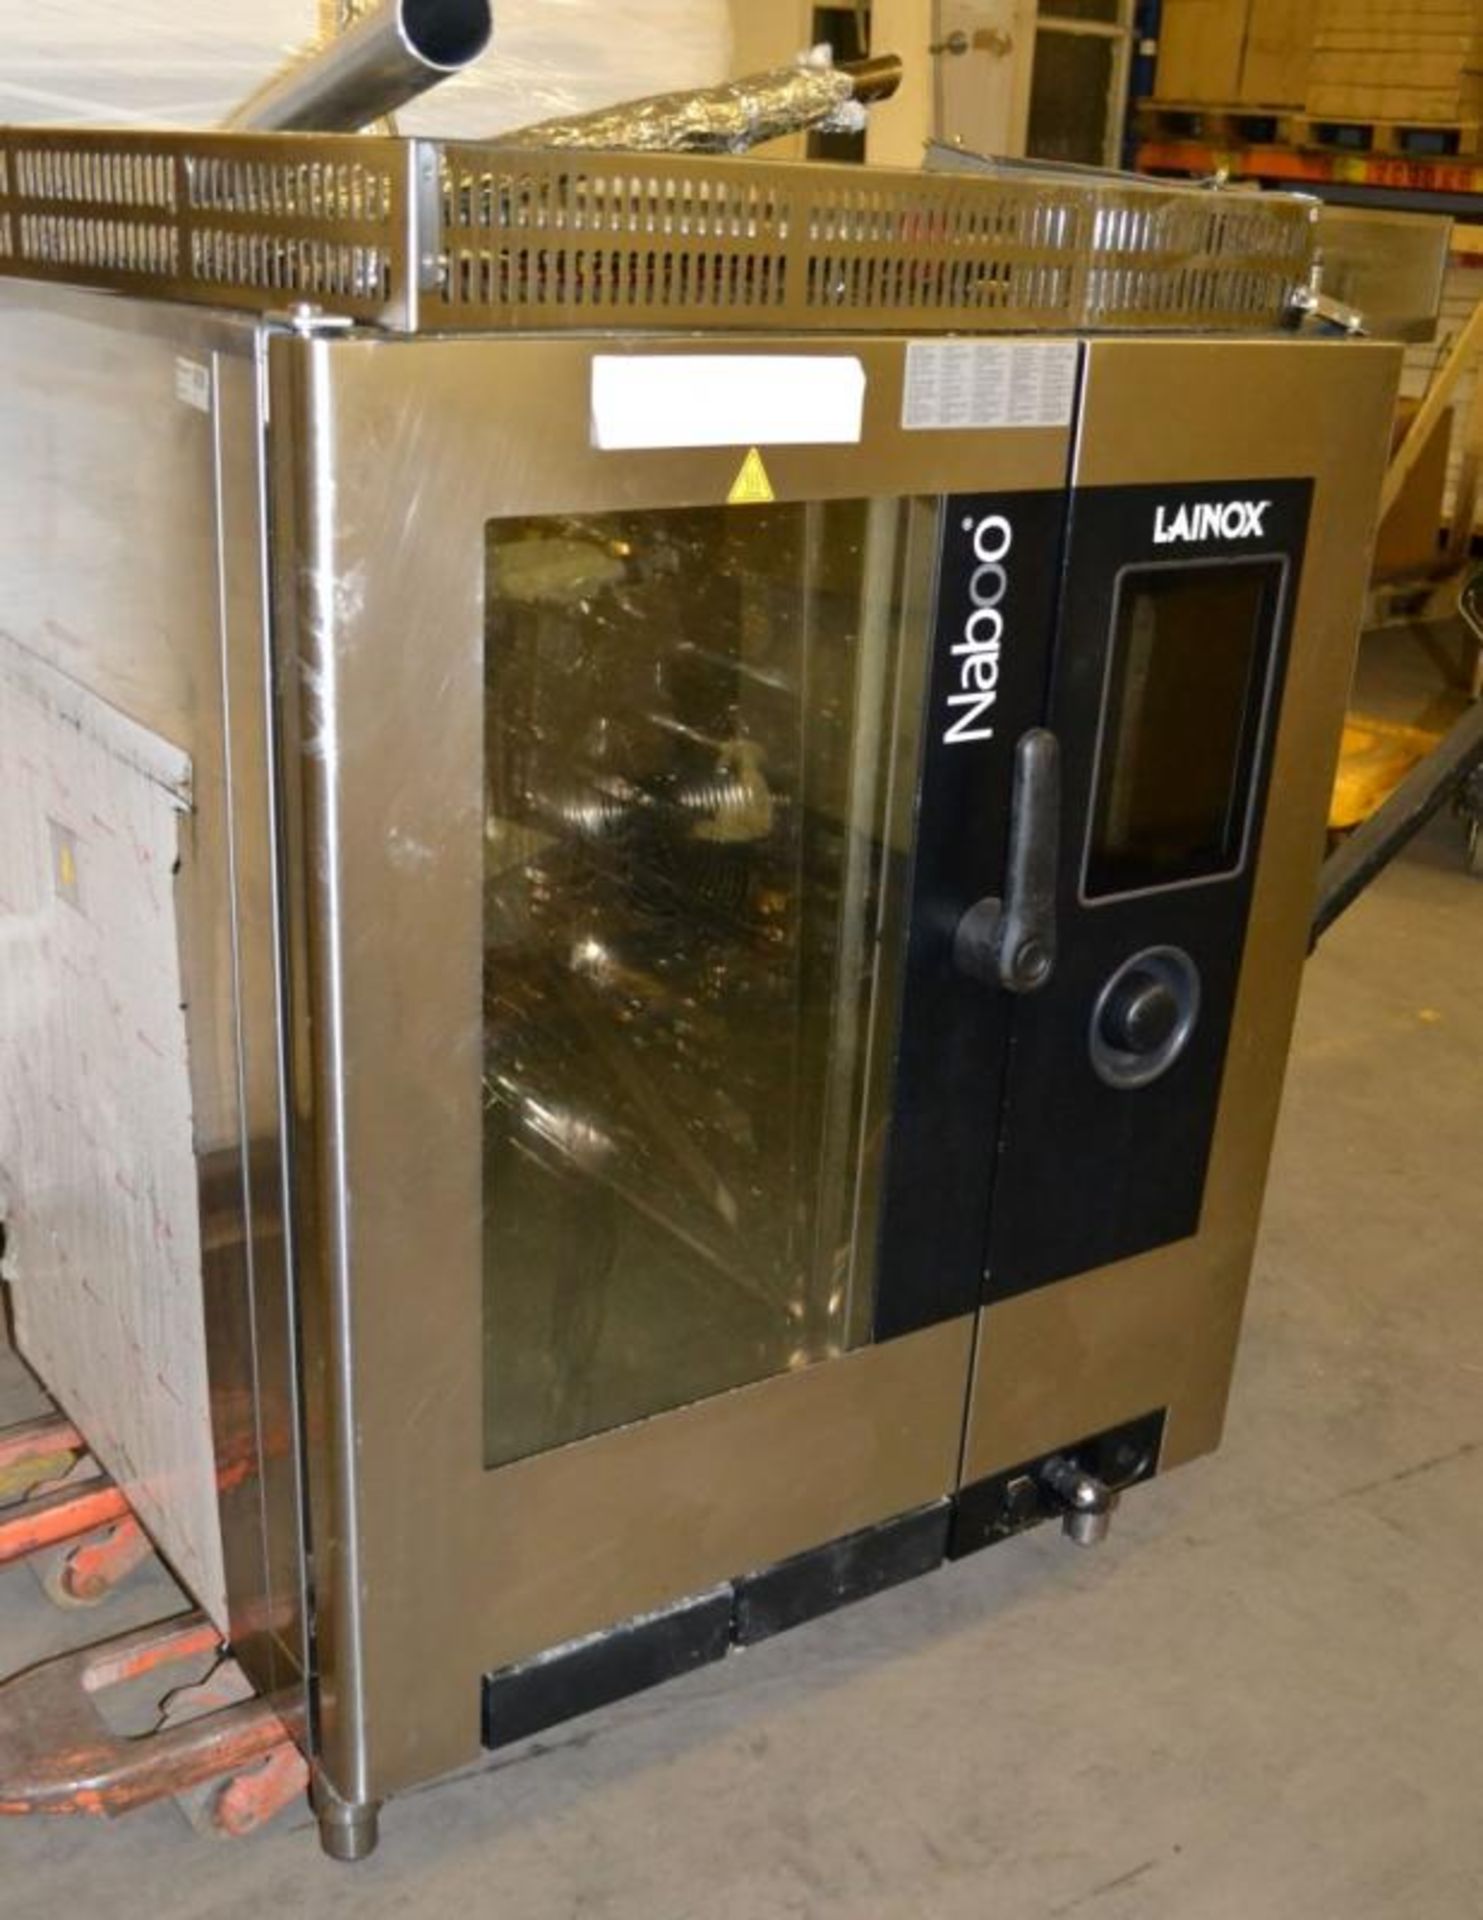 1 x Lainox Naboo NAGB101 Gas Combination Oven RRP £15,600 - Ref:NCE021 - CL007 - Location: Bolton BL - Image 2 of 8